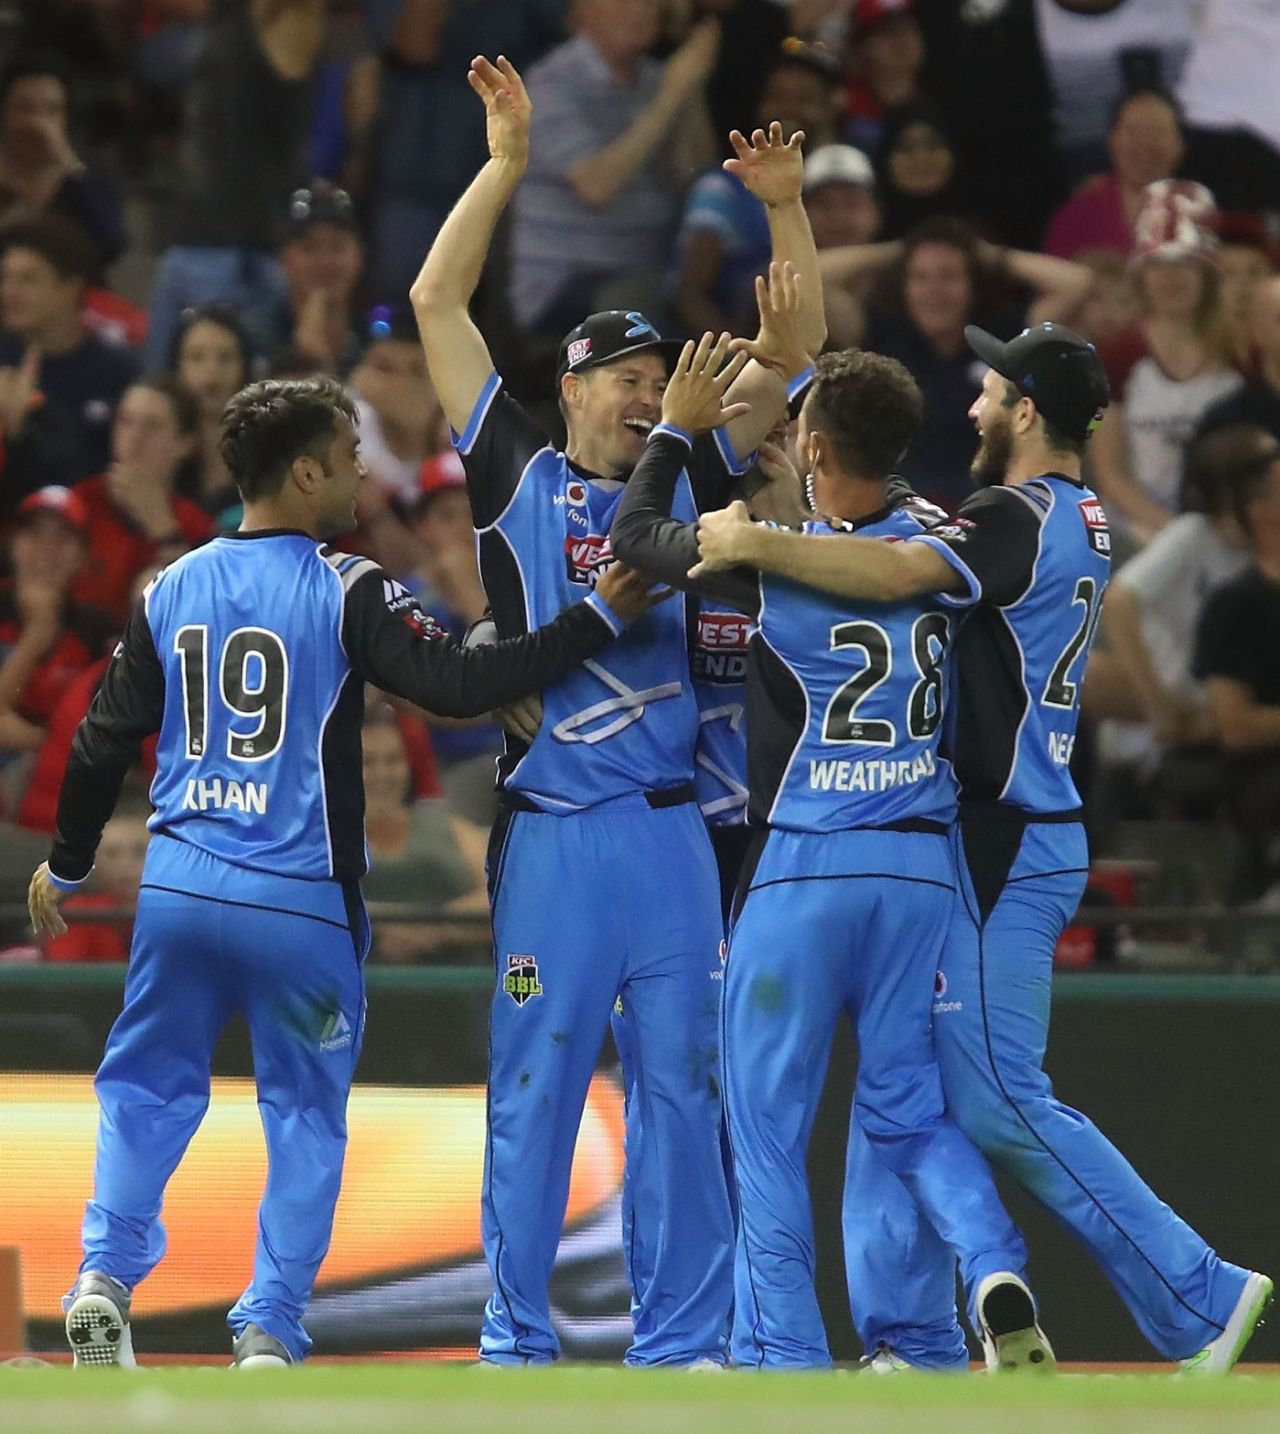 Ben Laughlin and Jake Weatherald combined to take an astonishing catch, Melbourne Renegades v Adelaide Strikers, BBL 2017-18, Melbourne, January 22, 2018